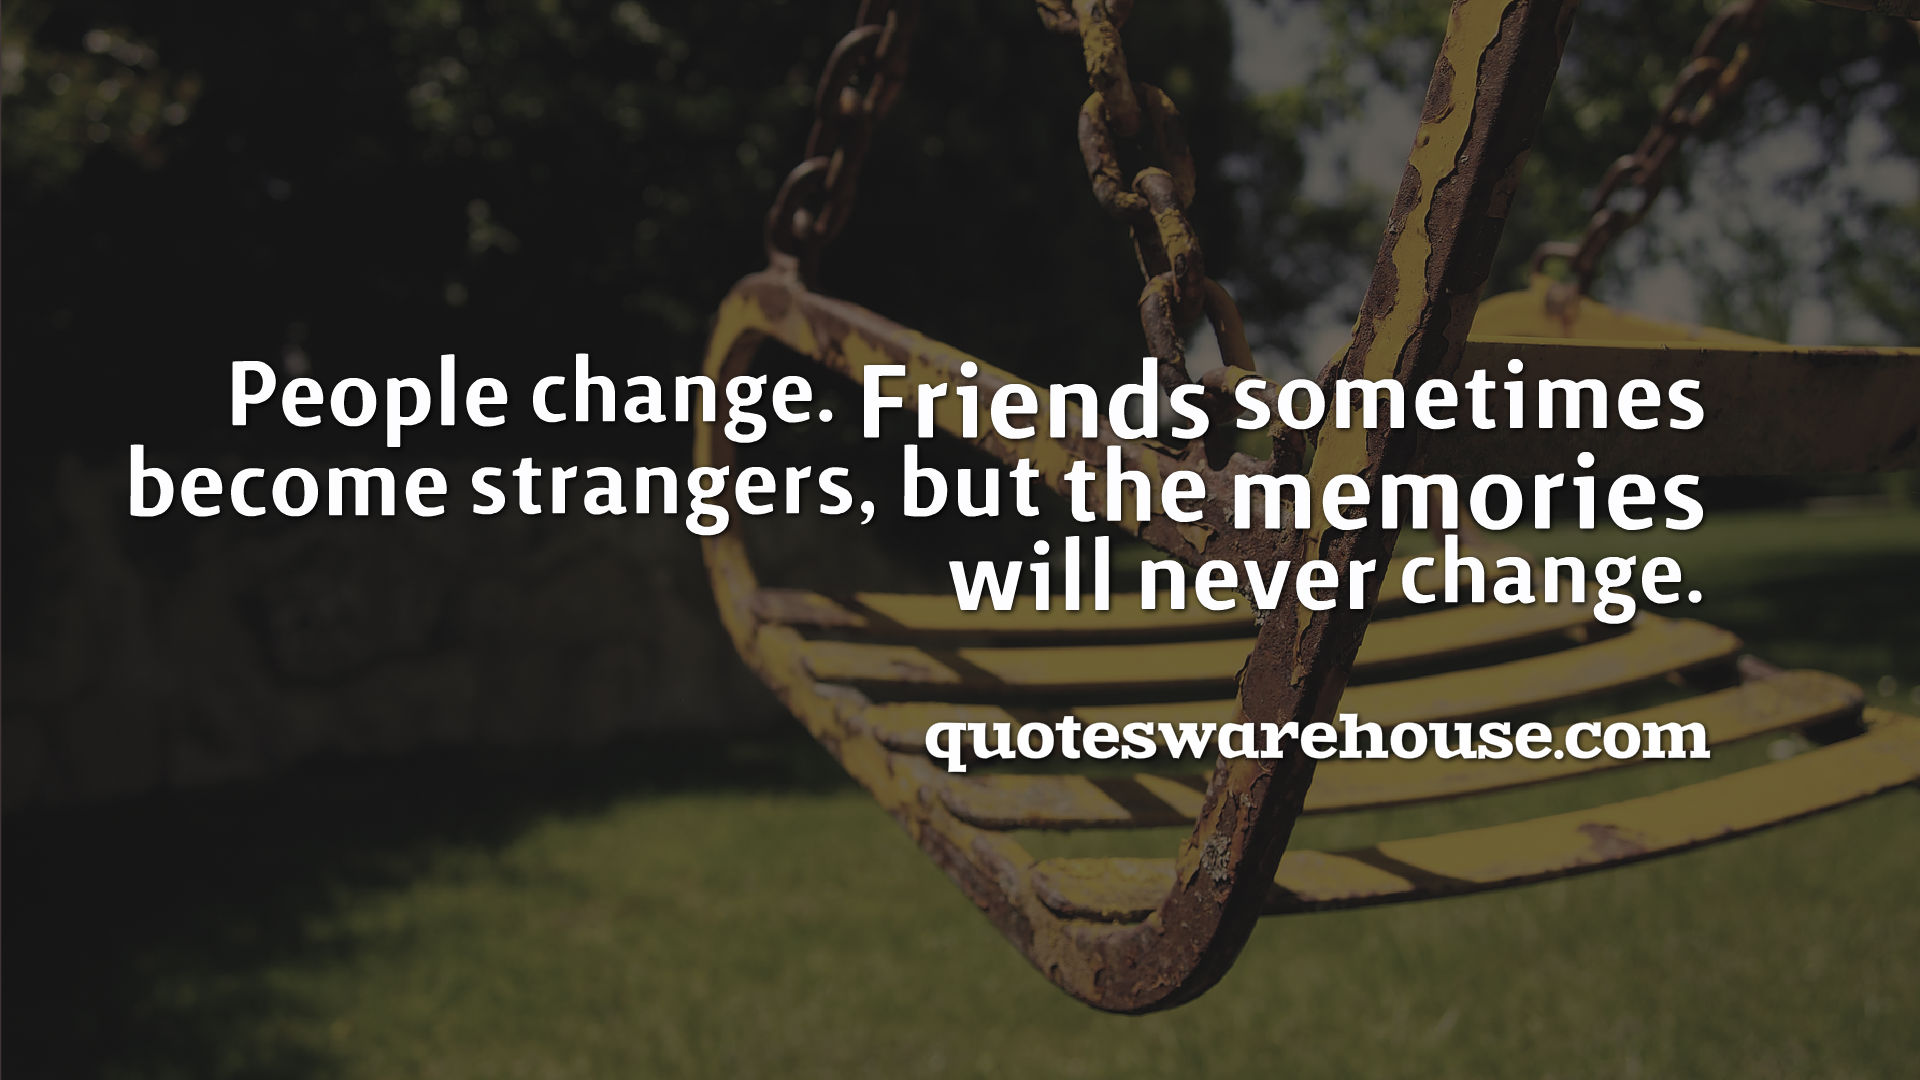 Friend Quotes And Sayings About Broken Friendships. QuotesGram